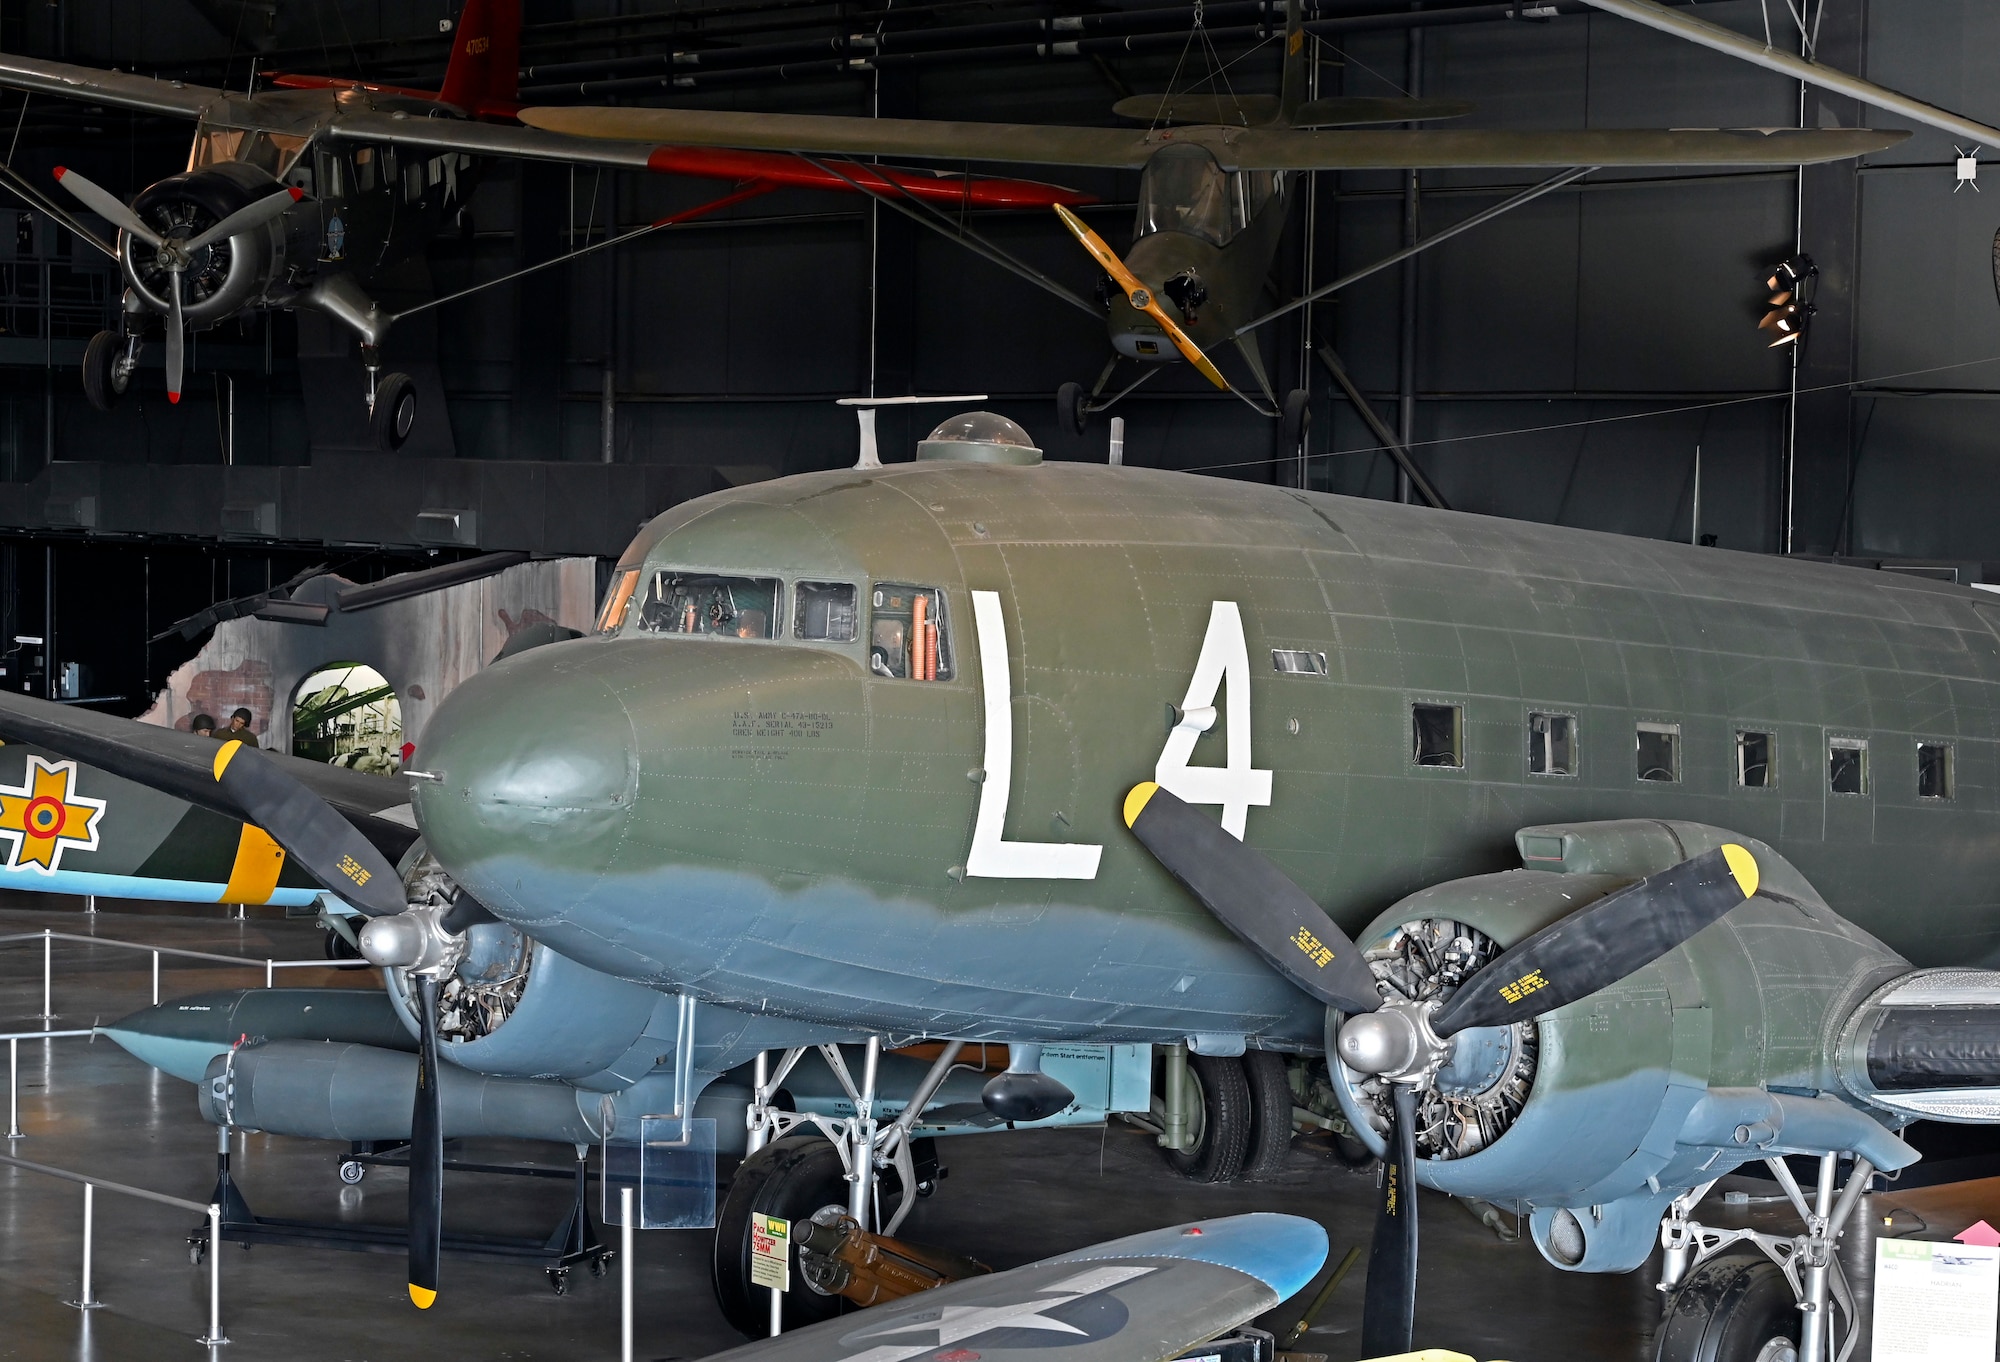 Douglas C-47D Skytrain in the World War II Gallery of the National Museum of the U.S. Air Force.